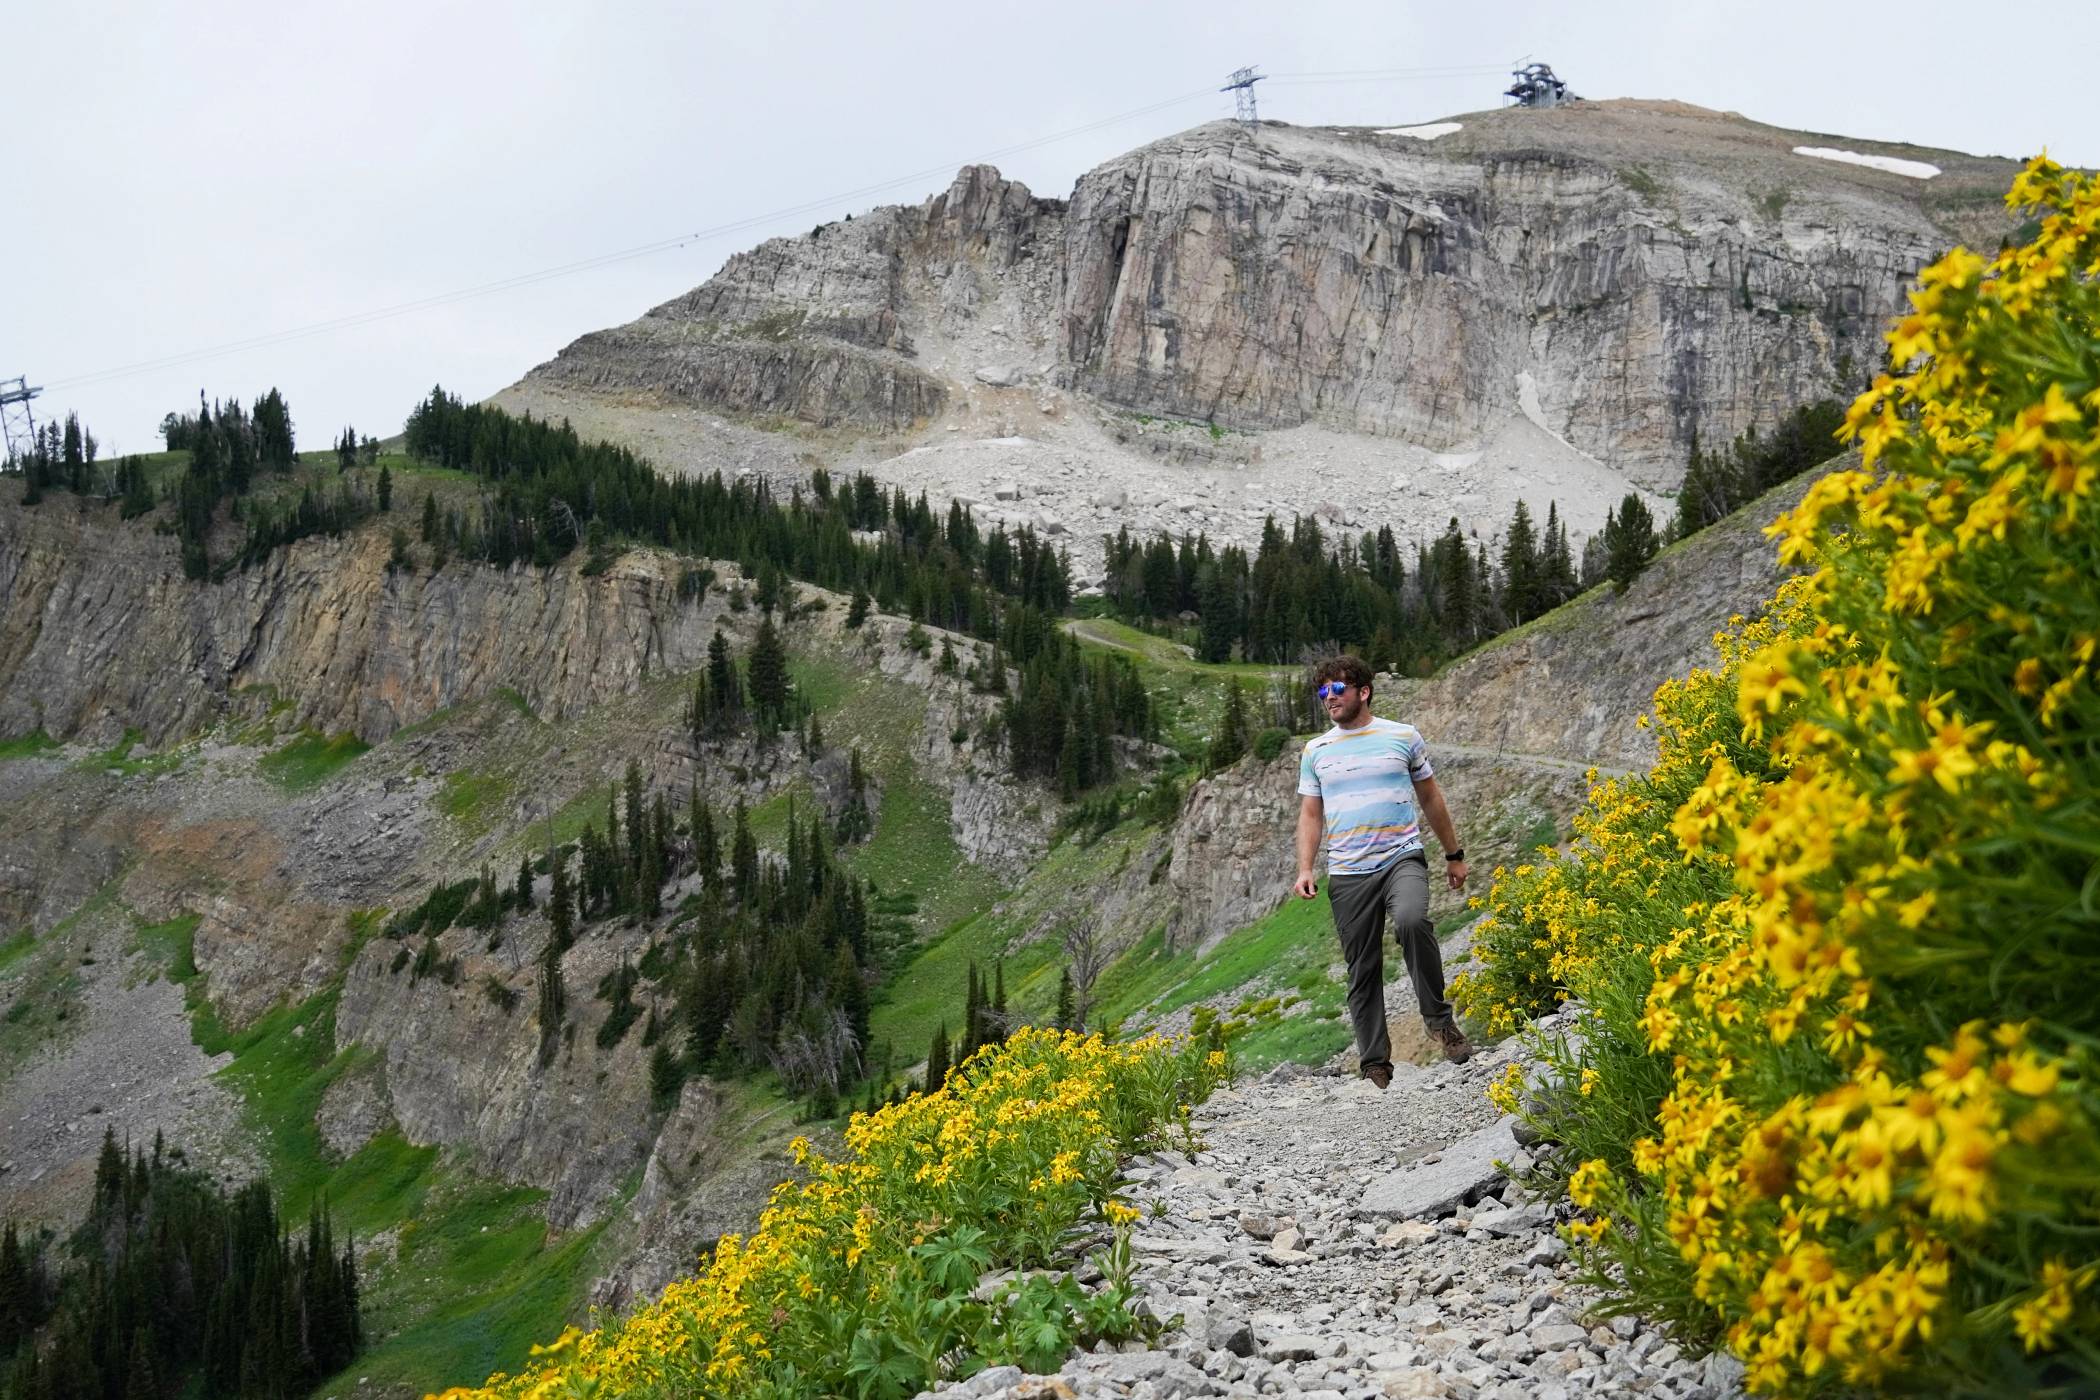 Man walking along the Cirque Trail surrounded by flowers